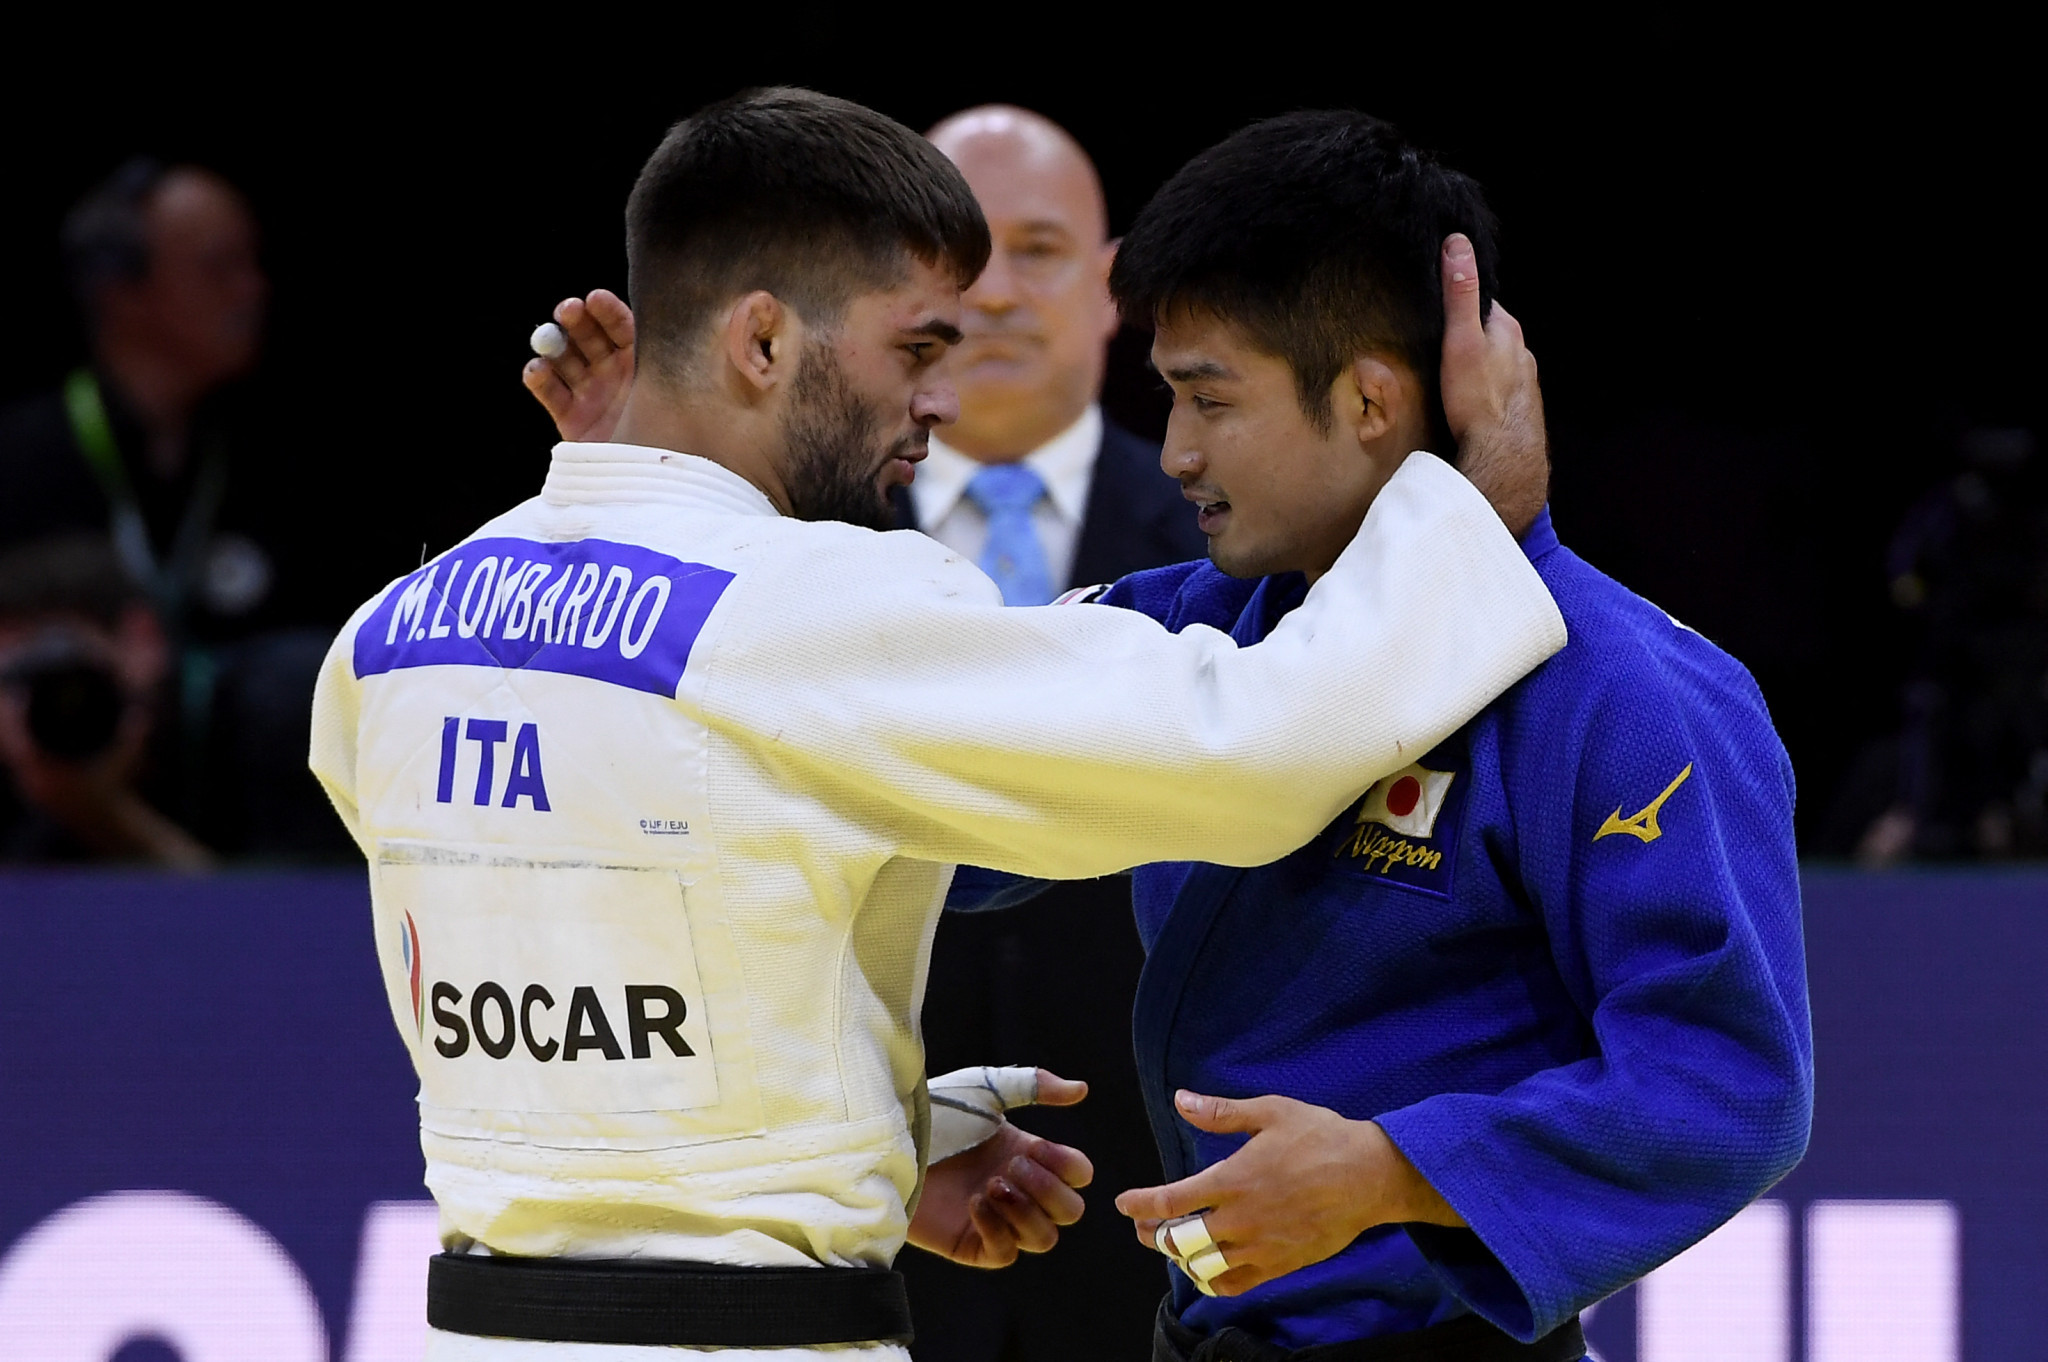 Manuel Lombardo congratulates Joshiro Maruyama for successfully defending the men's under-66kg crown ©Getty Images